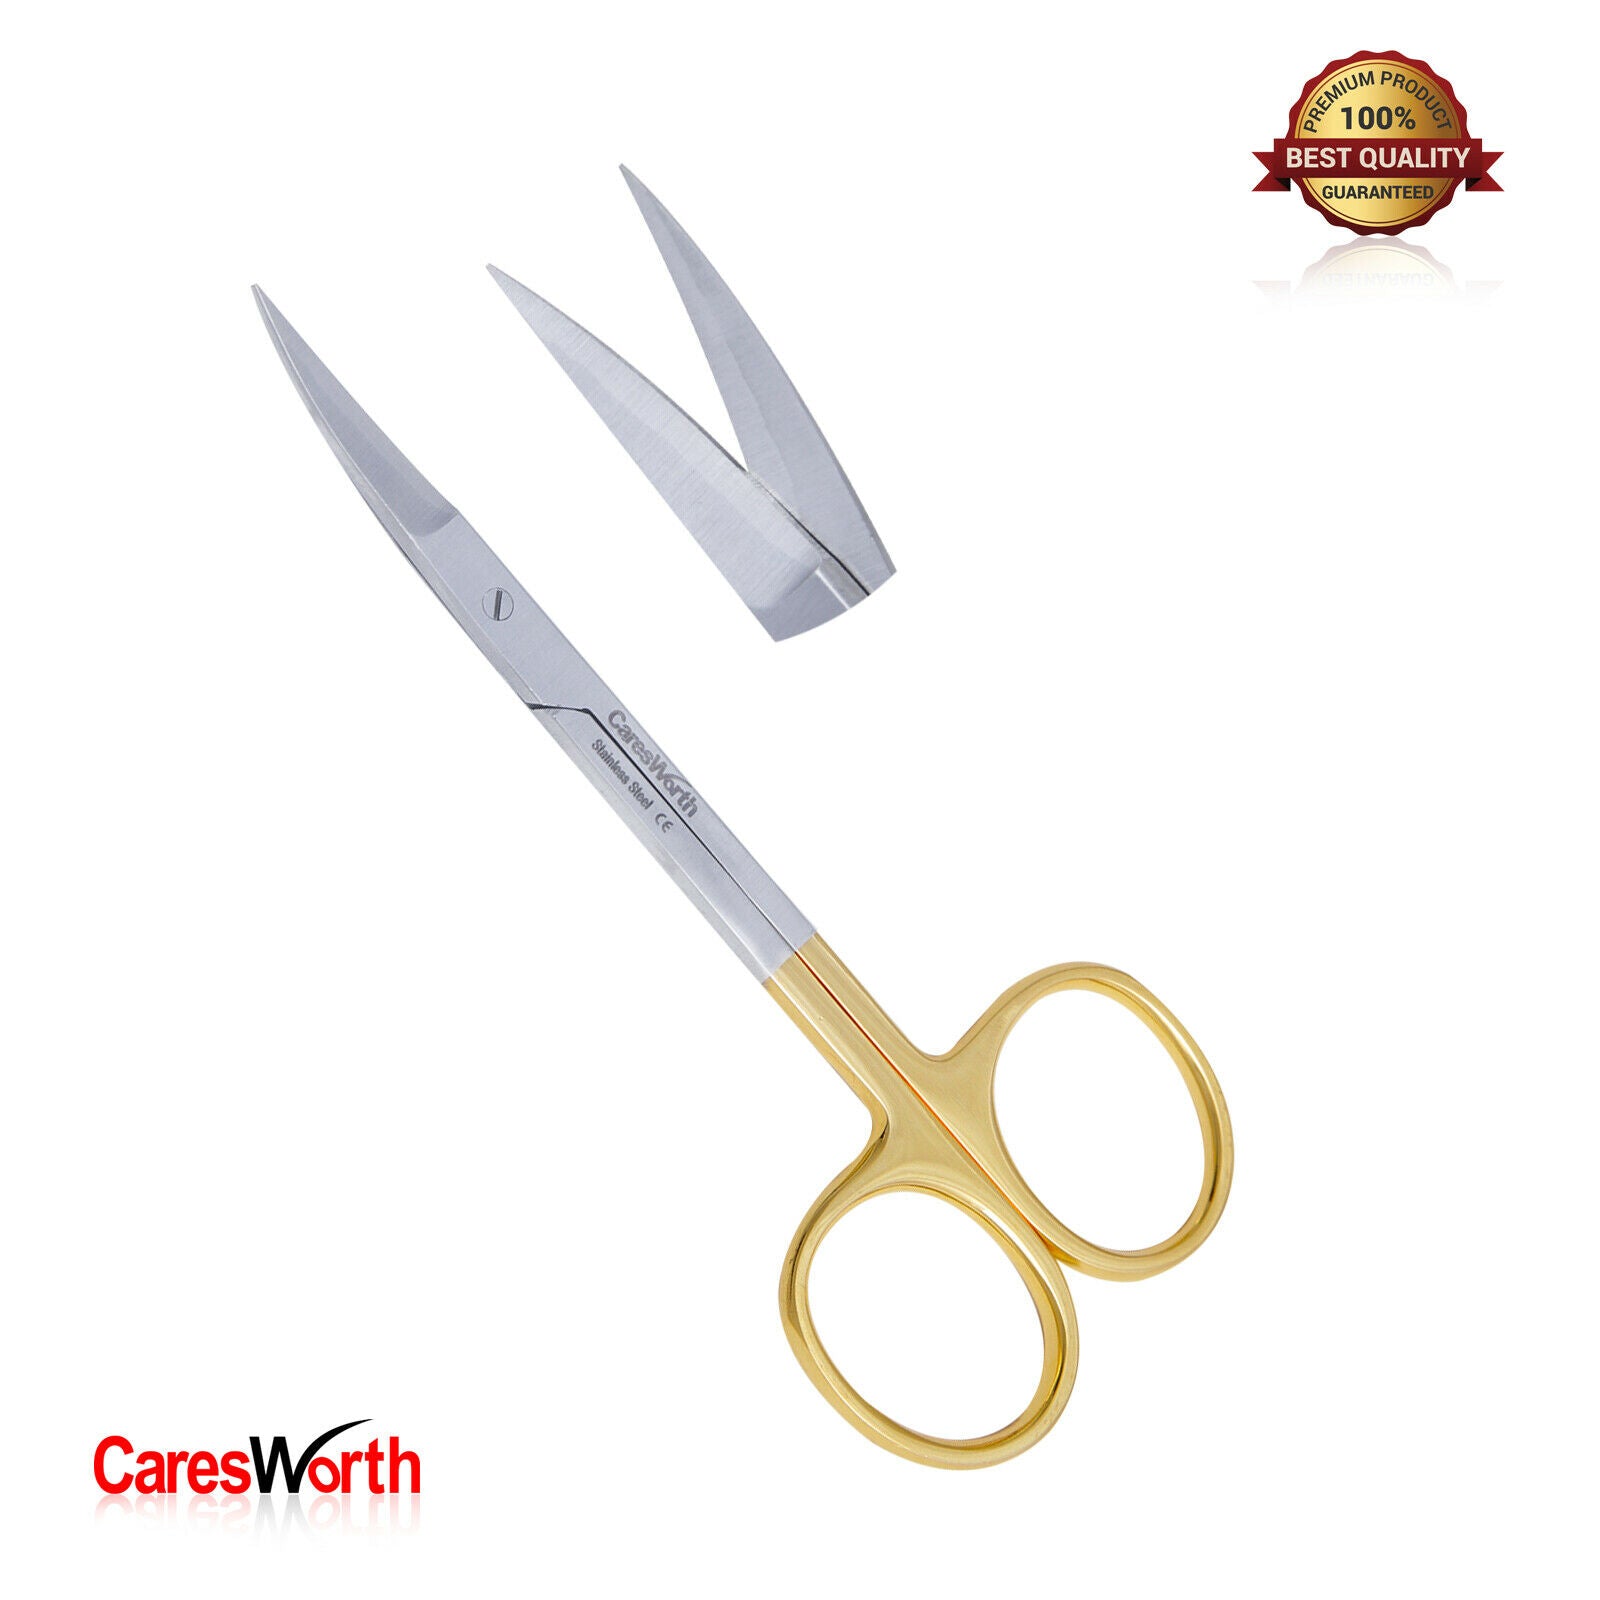 Iris Scissor Dissecting Curved with Tungsten Carbide Inserts 11.5cm, Surgical, Dental and Veterinary